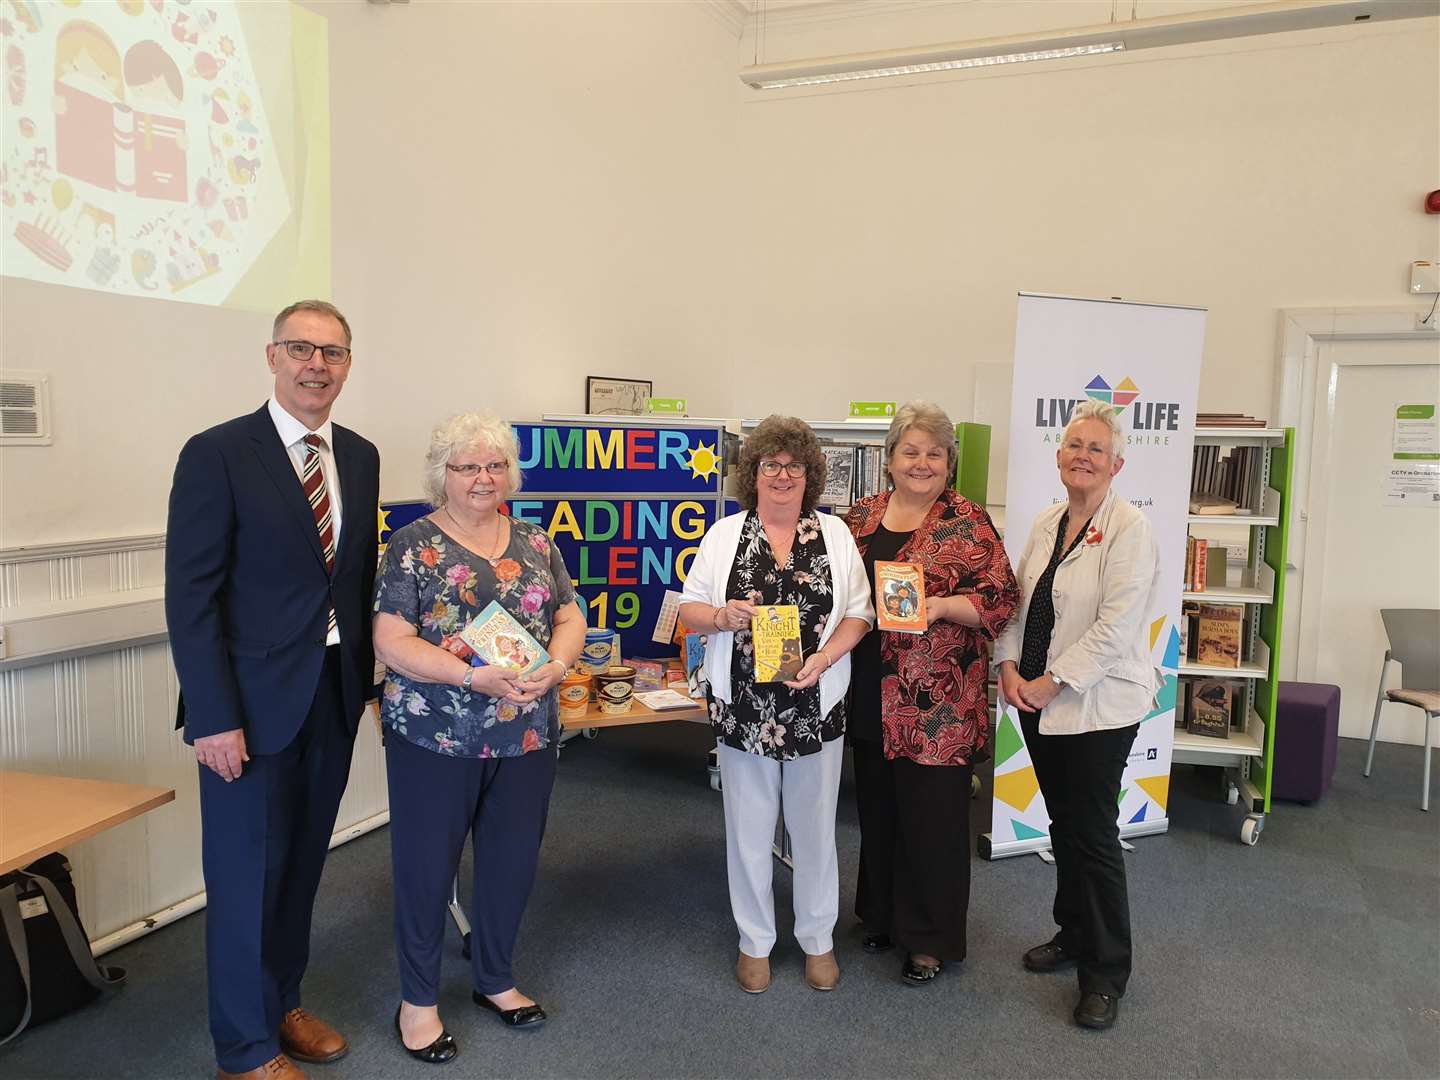 At the launch of the Summer Reading Challenge are (from left): Gerry Stephens, financial director for Mackie’s of Scotland; councillor Anne Simpson, Aberdeenshire Council’s culture and sport sub-committee vice-chairwoman; councillor Gillian Owen, Aberdeenshire Council’s education and children’s services committee chairwoman; councillor Anne Stirling, Aberdeenshire Council’s communities committee chairwoman and author Vivian French.